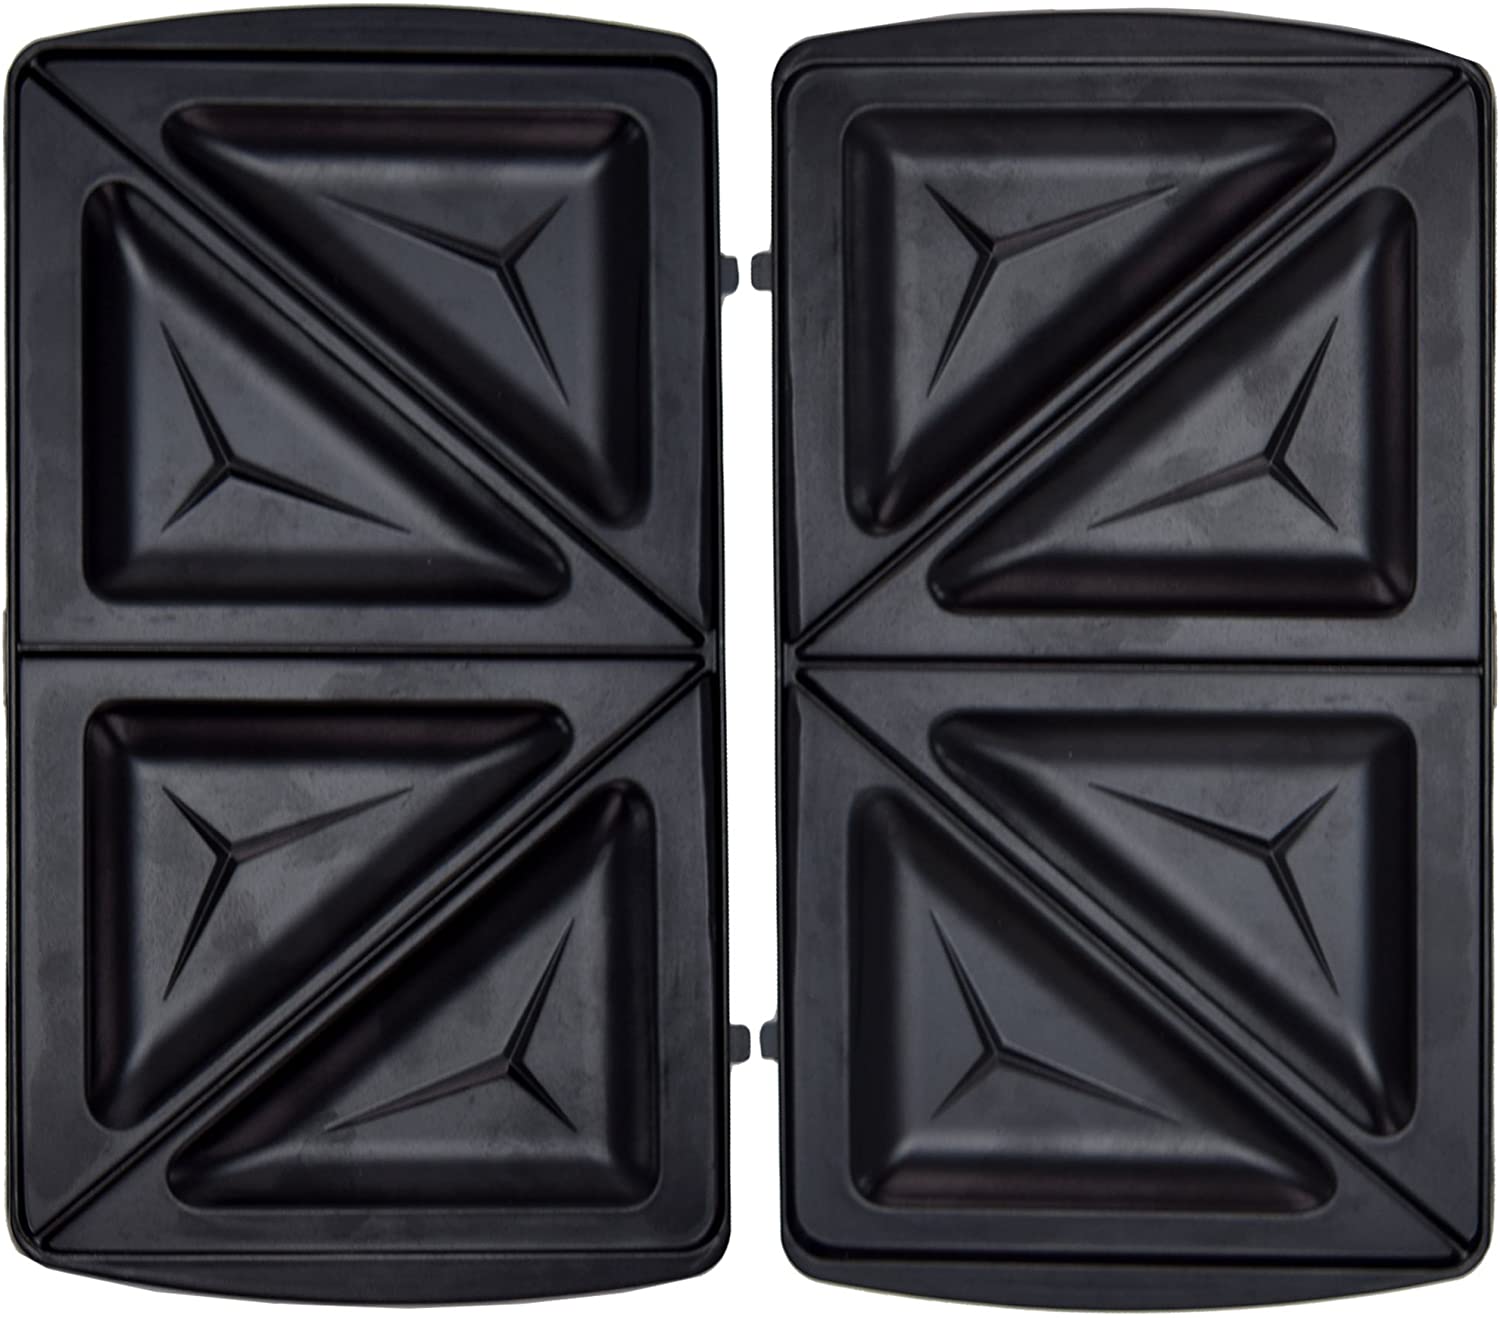 1 set of sandwich plates suitable for Syntrox Chef Maker SM-1300W.